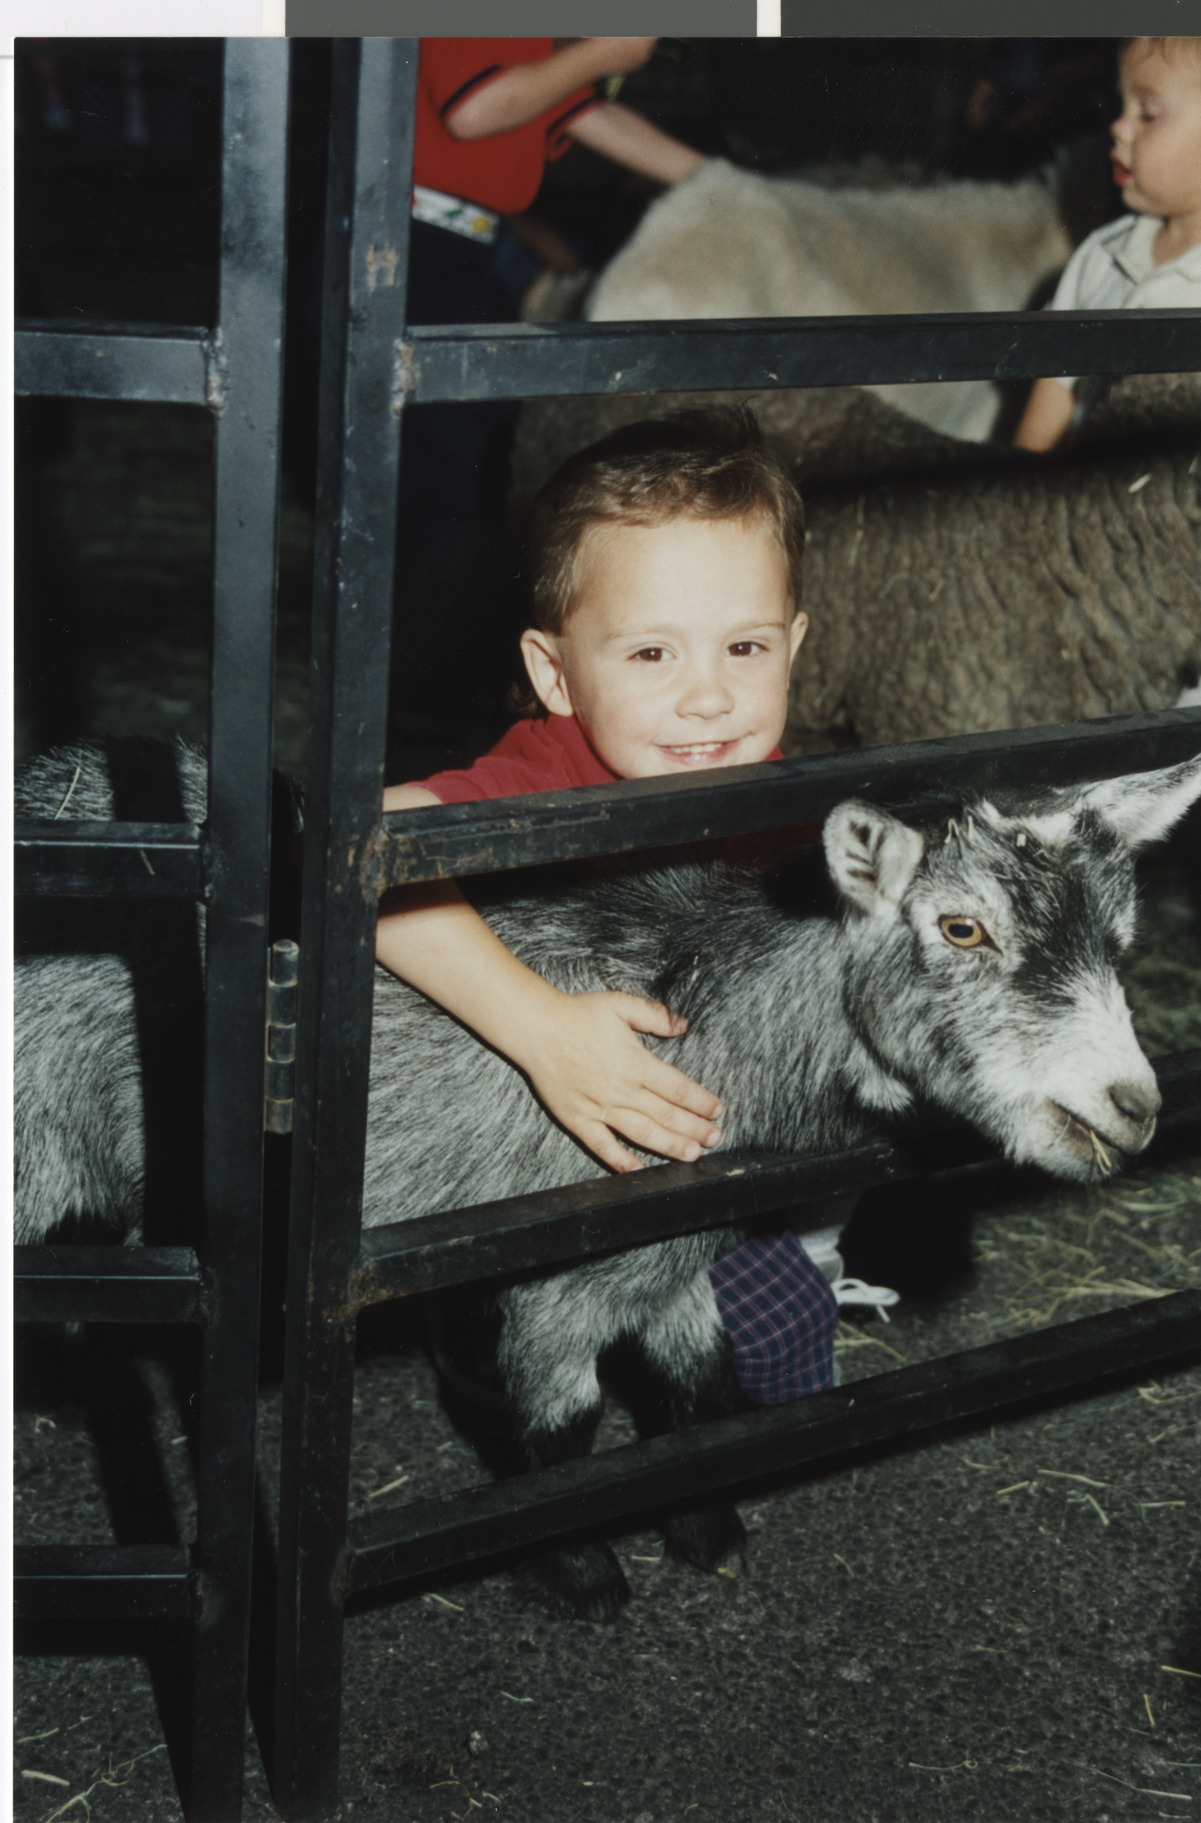 Photograph of a child petting a goat, 1990s